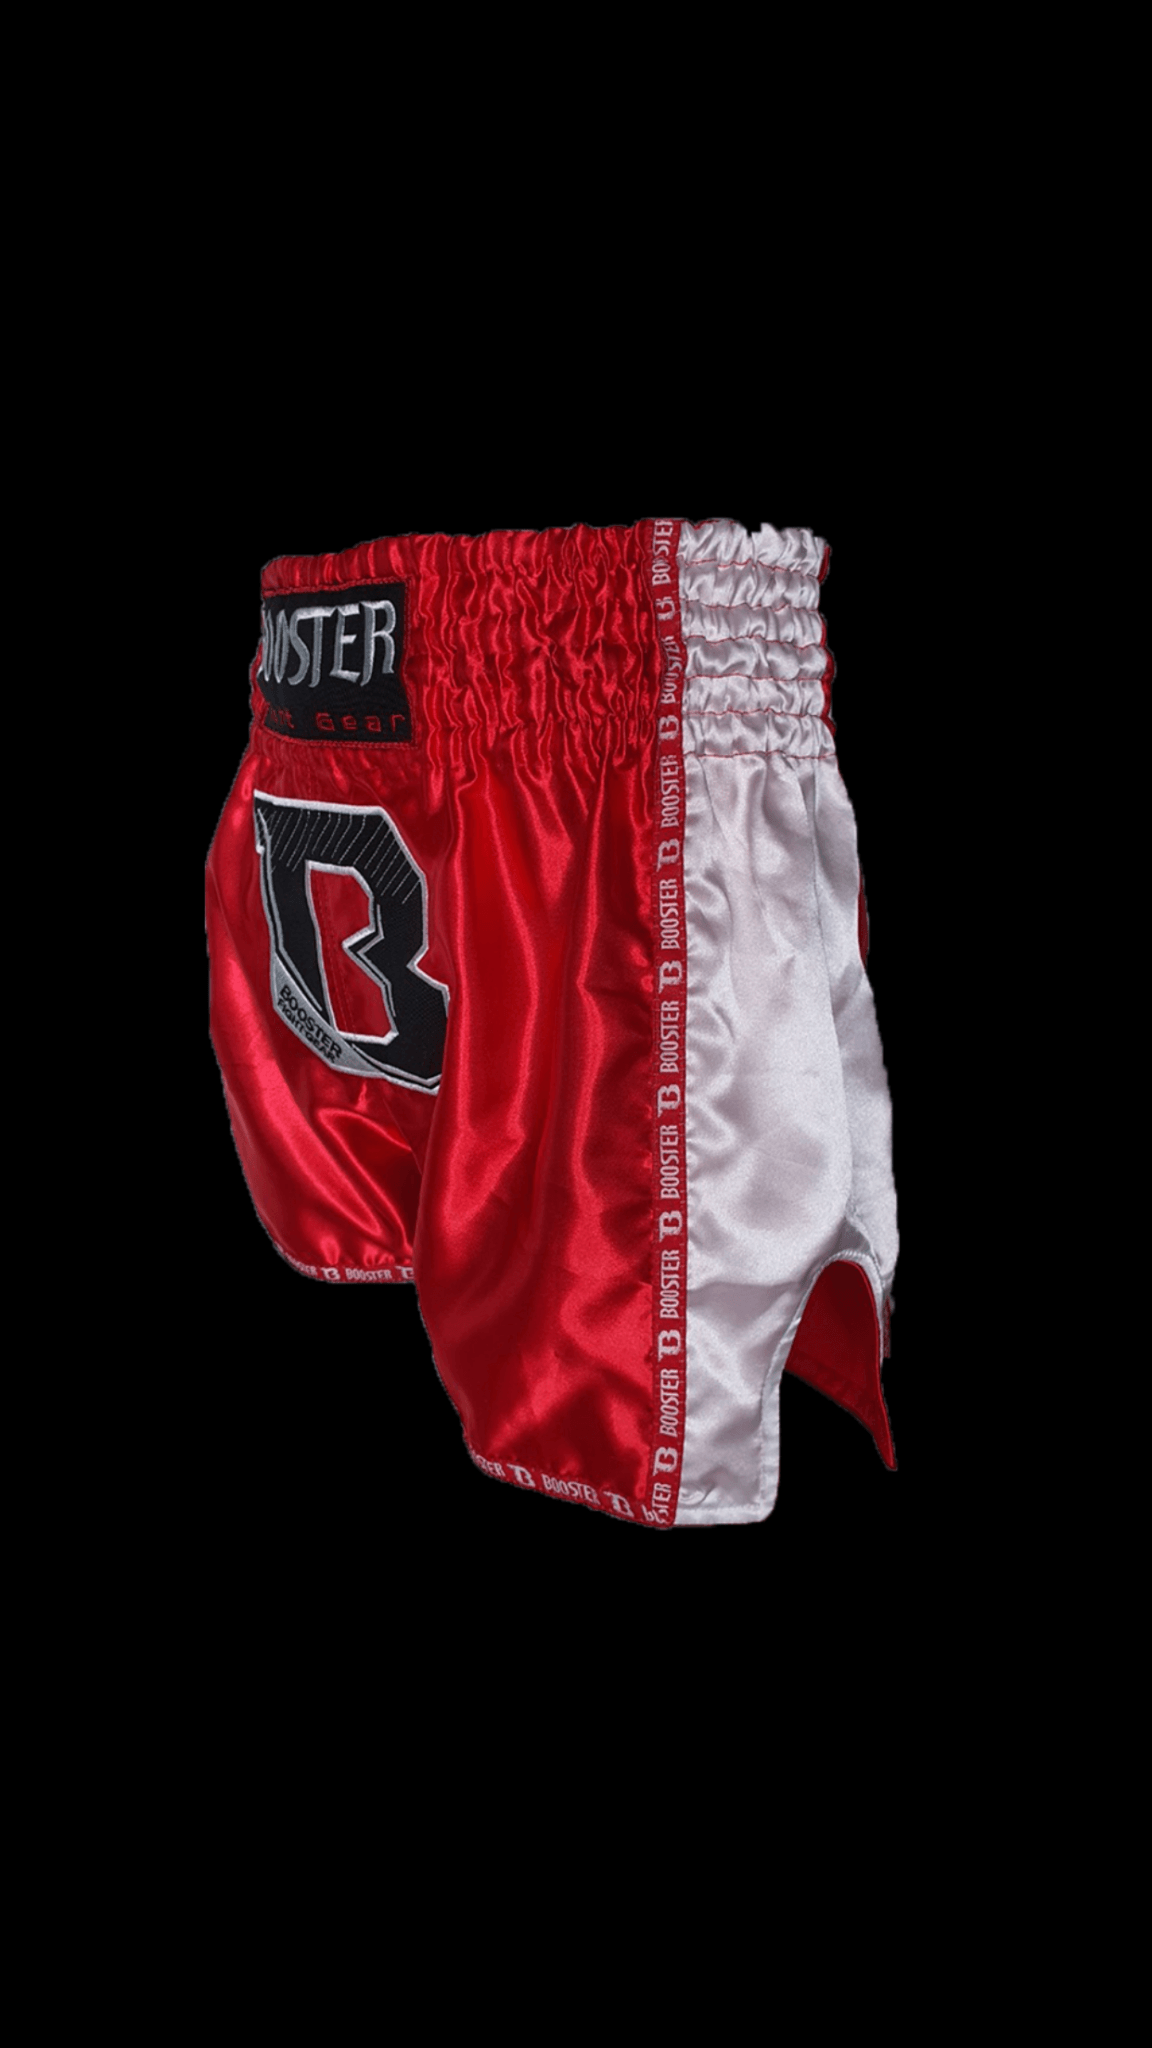 BOOSTER SHORTS TBT PRO 4 Red